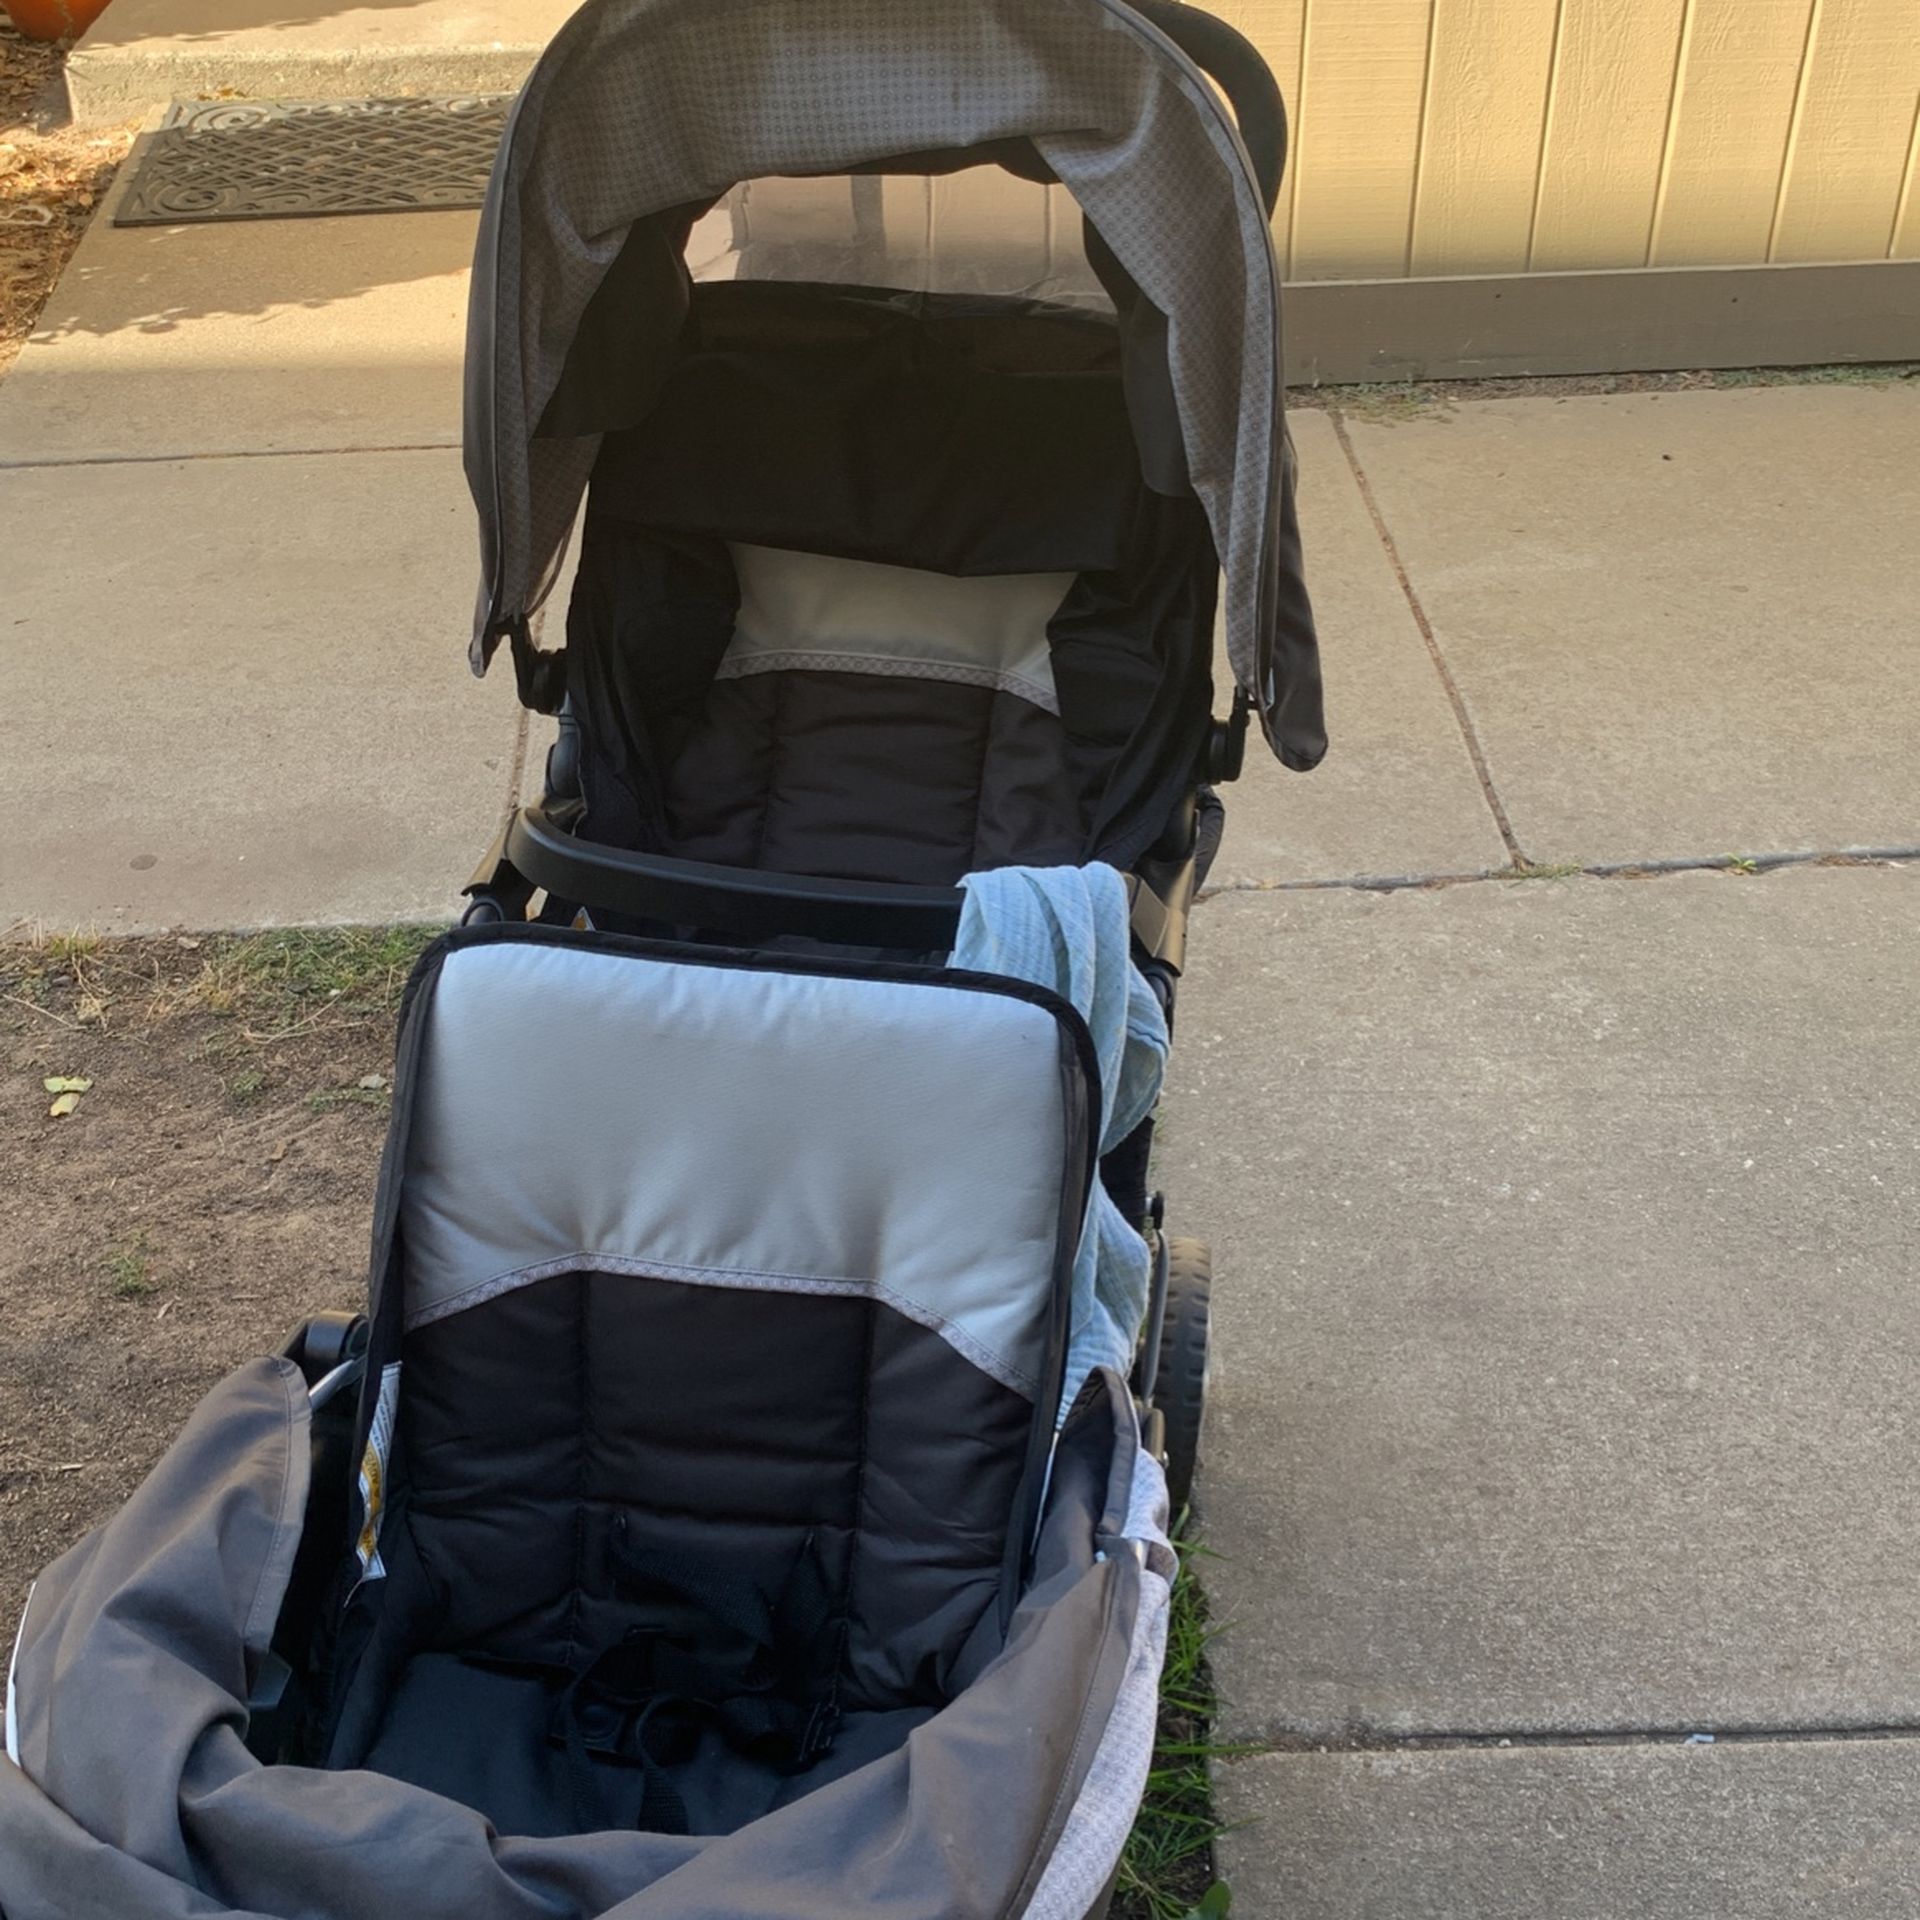 Duo Glider Double Stroller